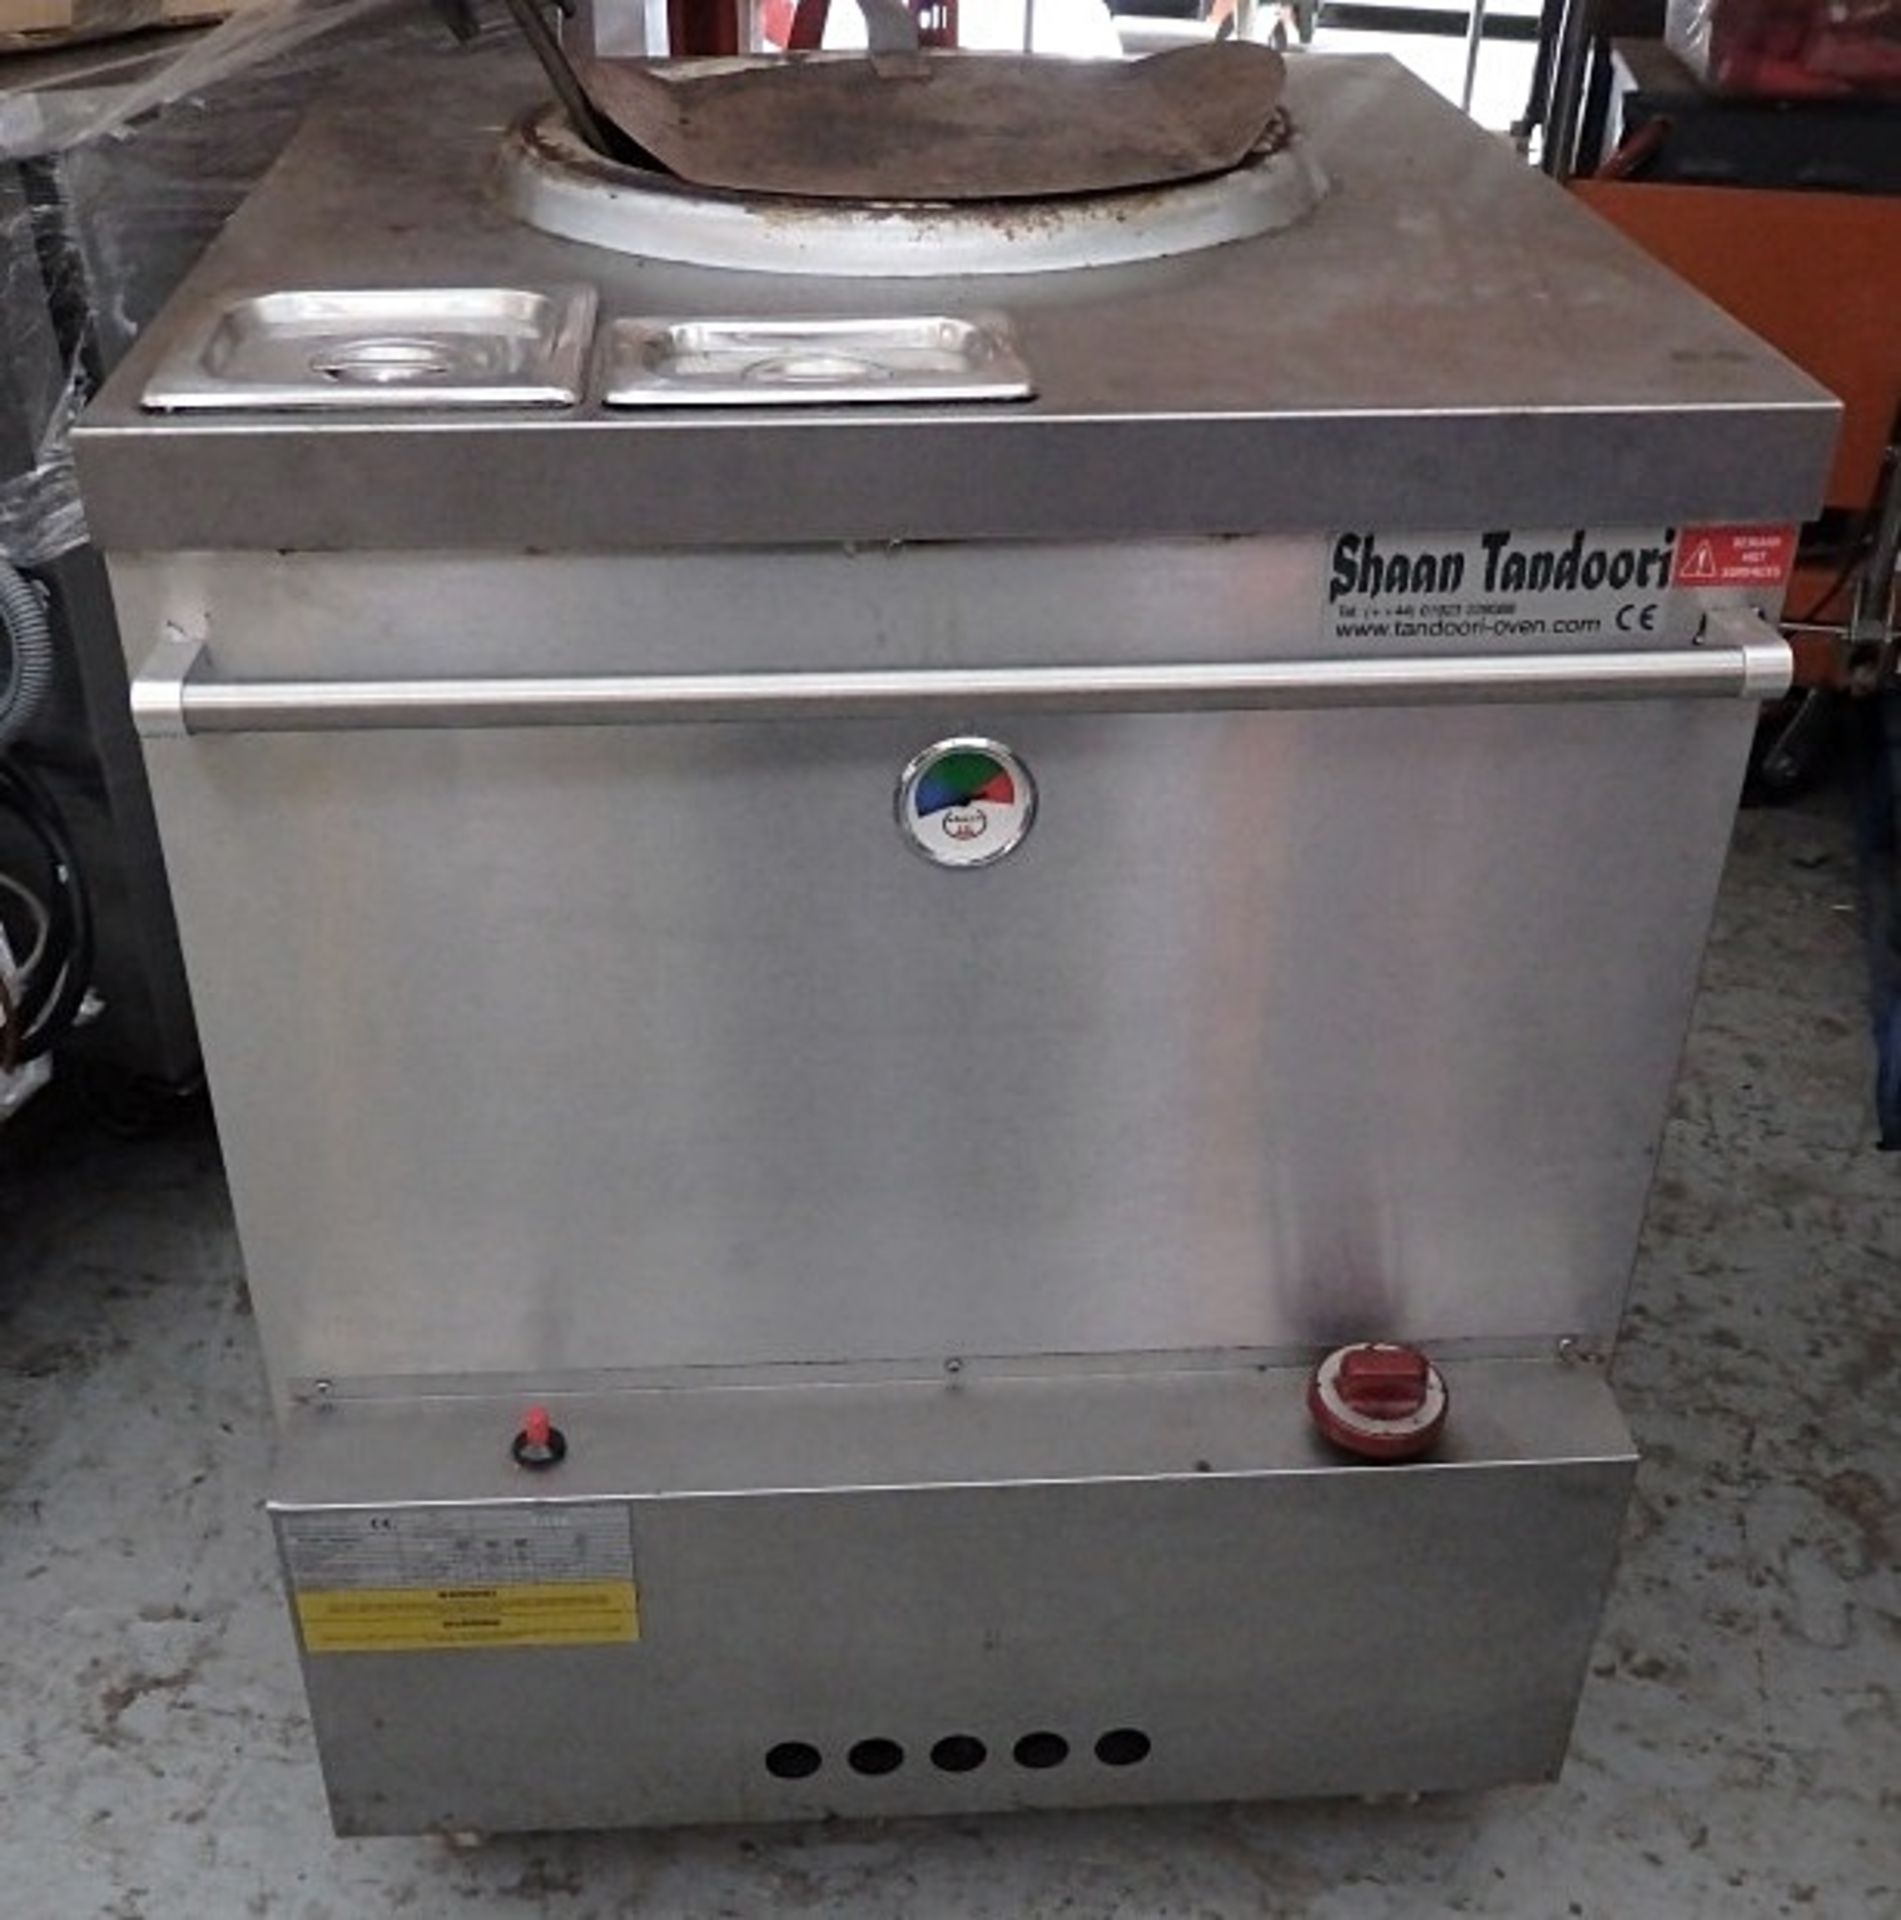 1 x Shaan Tandoori Commercial Oven - Dimensions: W71 x D76 x H86cm - Also Includes Skewers - Ref: - Image 2 of 9